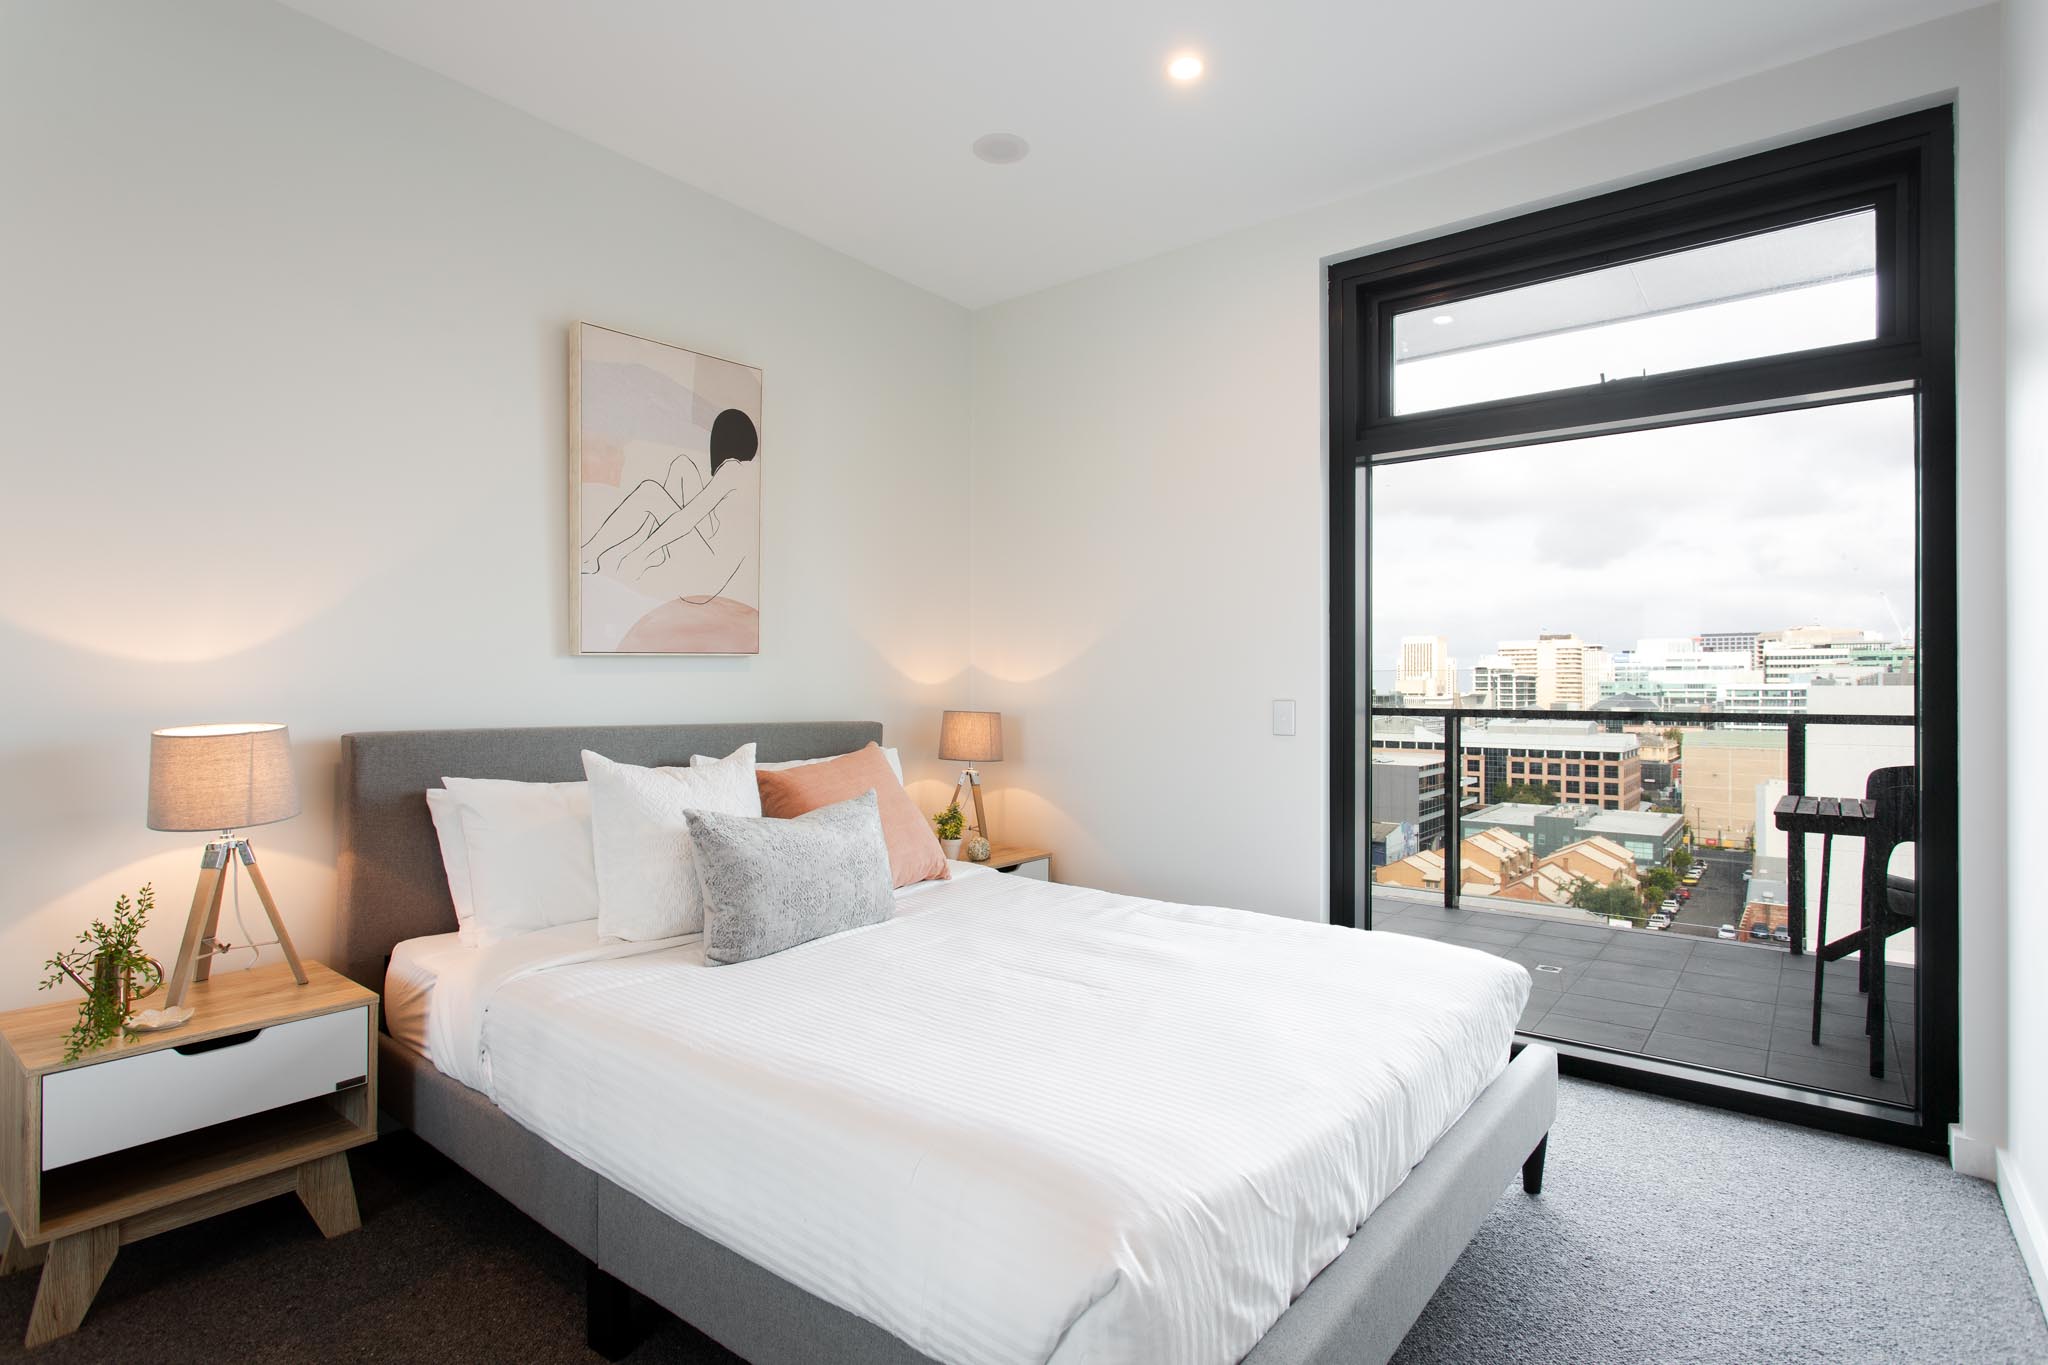 Master Bedroom - East End Apartments - Adelaide - Urban Rest